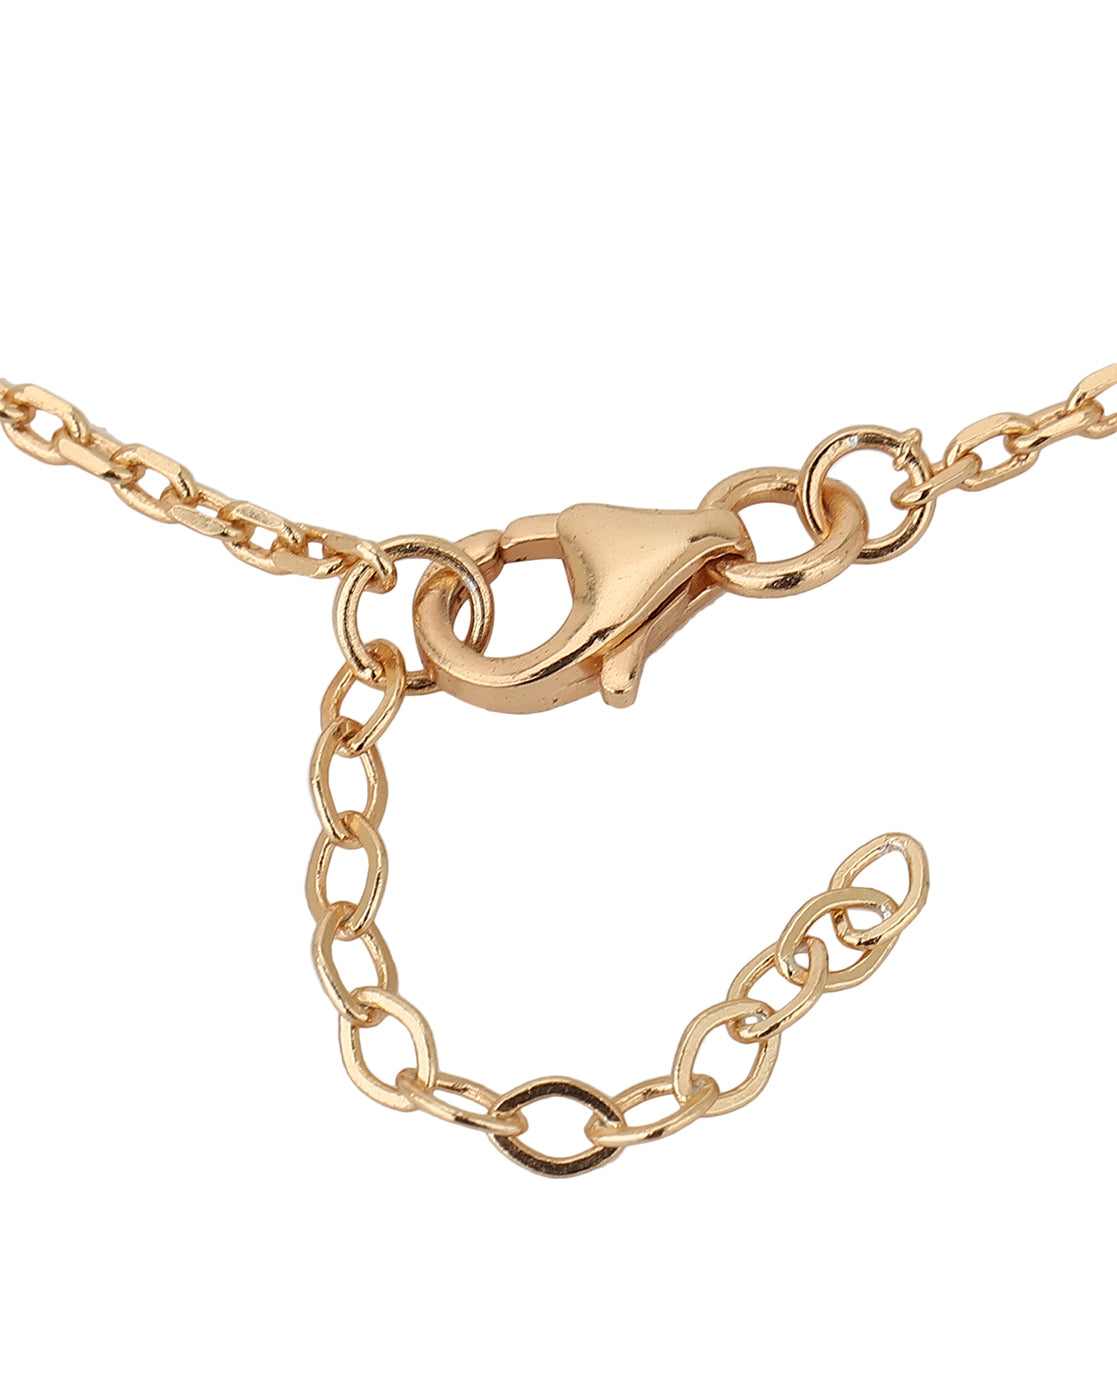 Buy Layered Gold Plated Link Chain Bracelet Online At Best Price @ Tata CLiQ